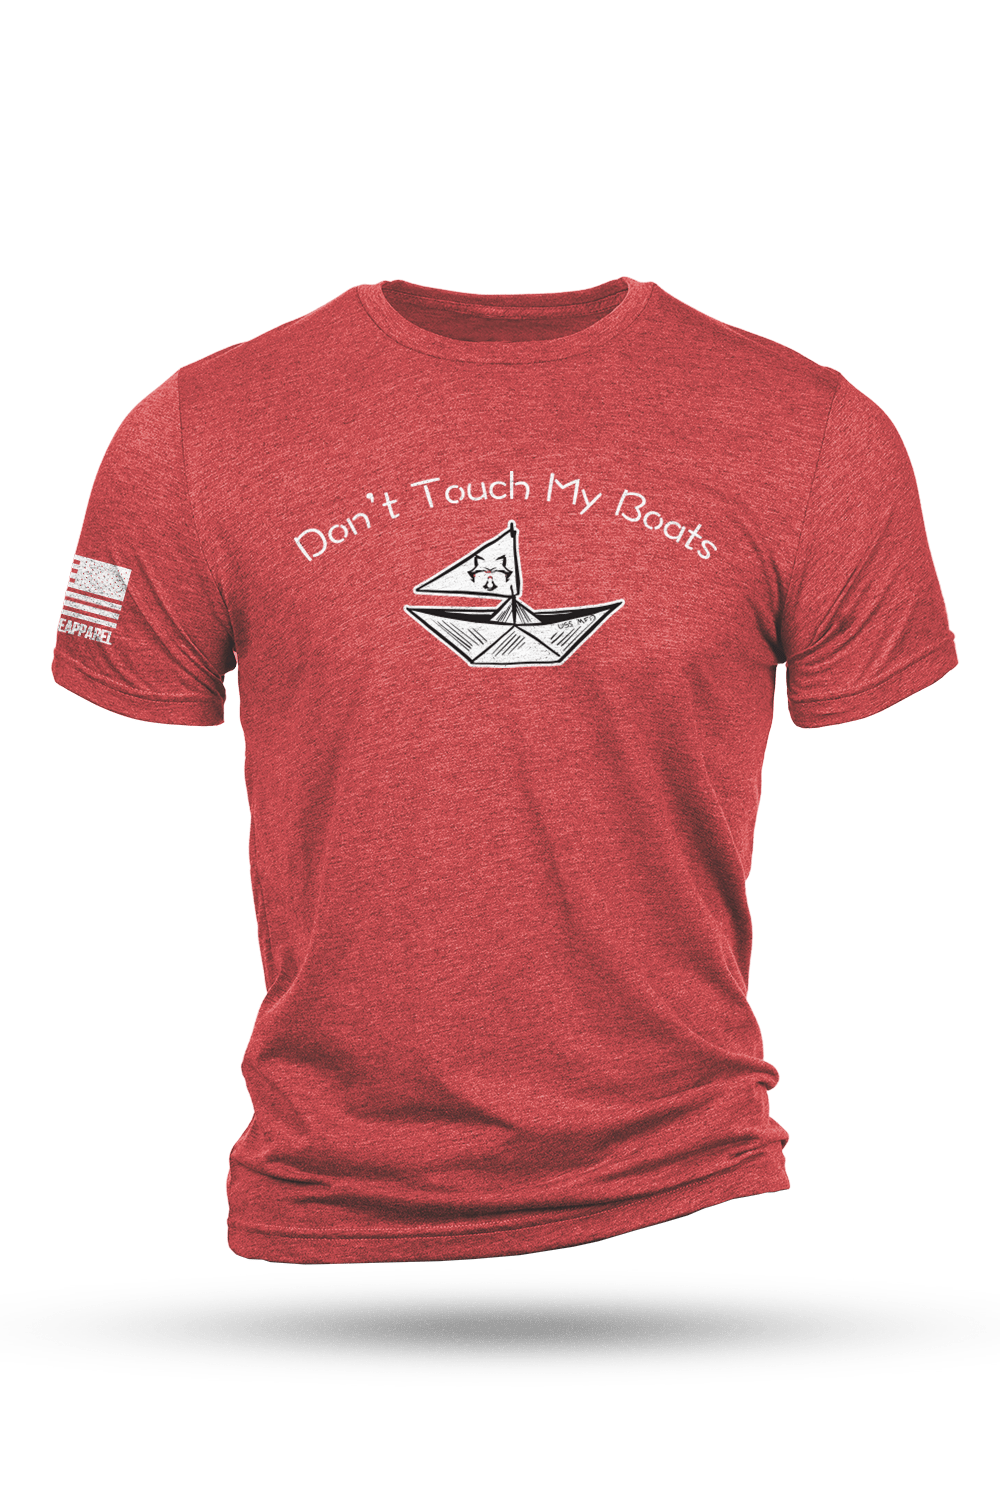 T-Shirt - Don't touch my boats